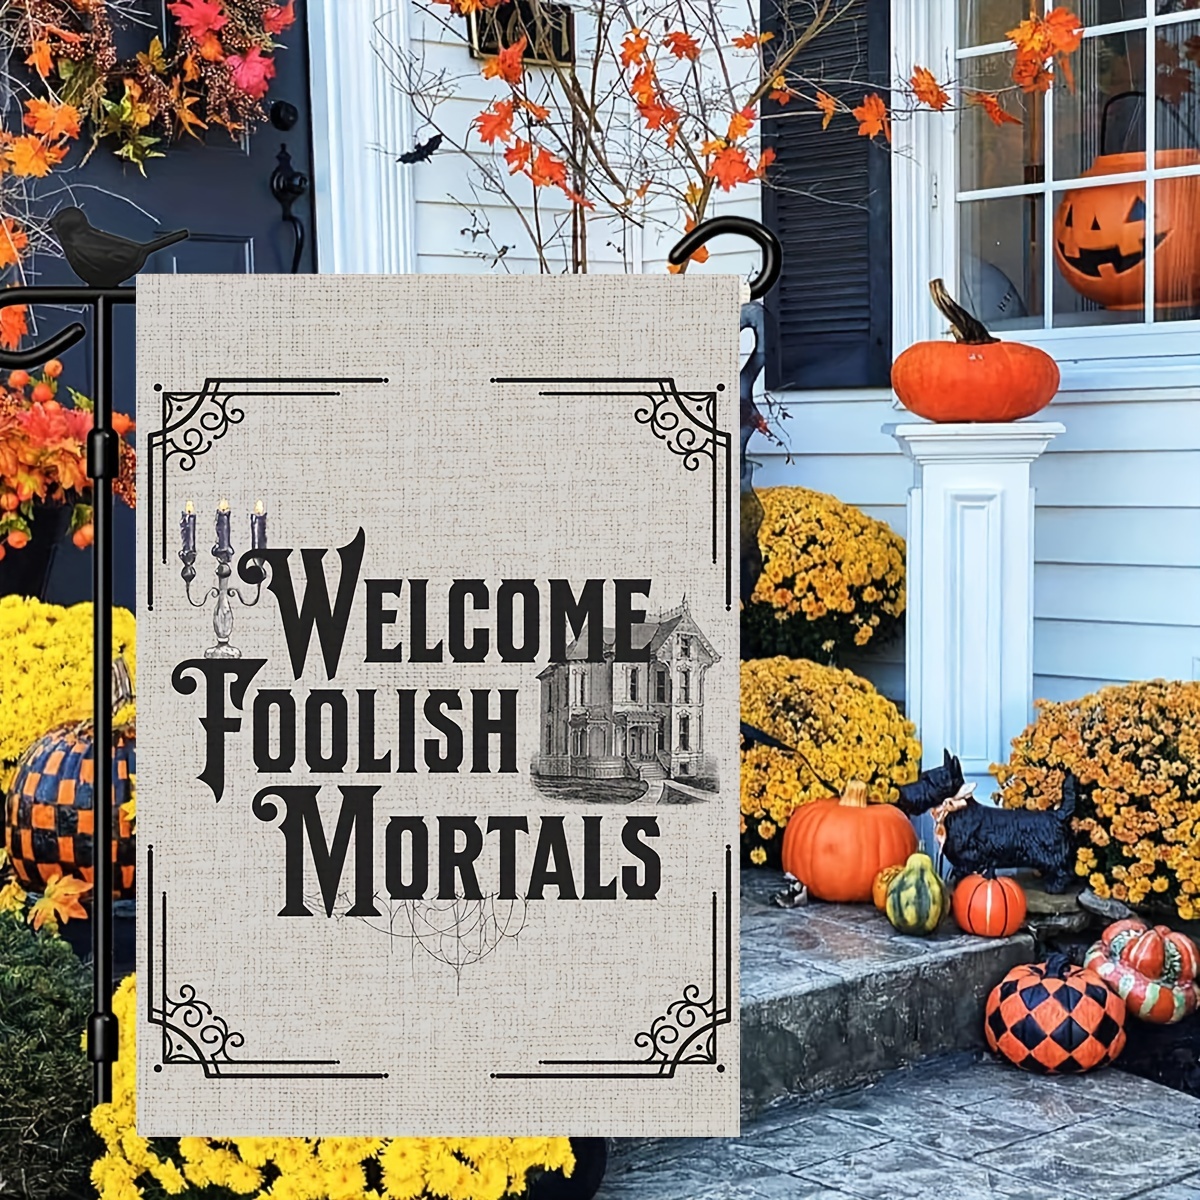 

Funny Halloween Garden Flag - Retro Haunted Emo Room Decor, Welcome Foolish Mortals, Double-sided Linen Outdoor Home Flag, 12x18 Inch, No Flagpole Needed - 1pc